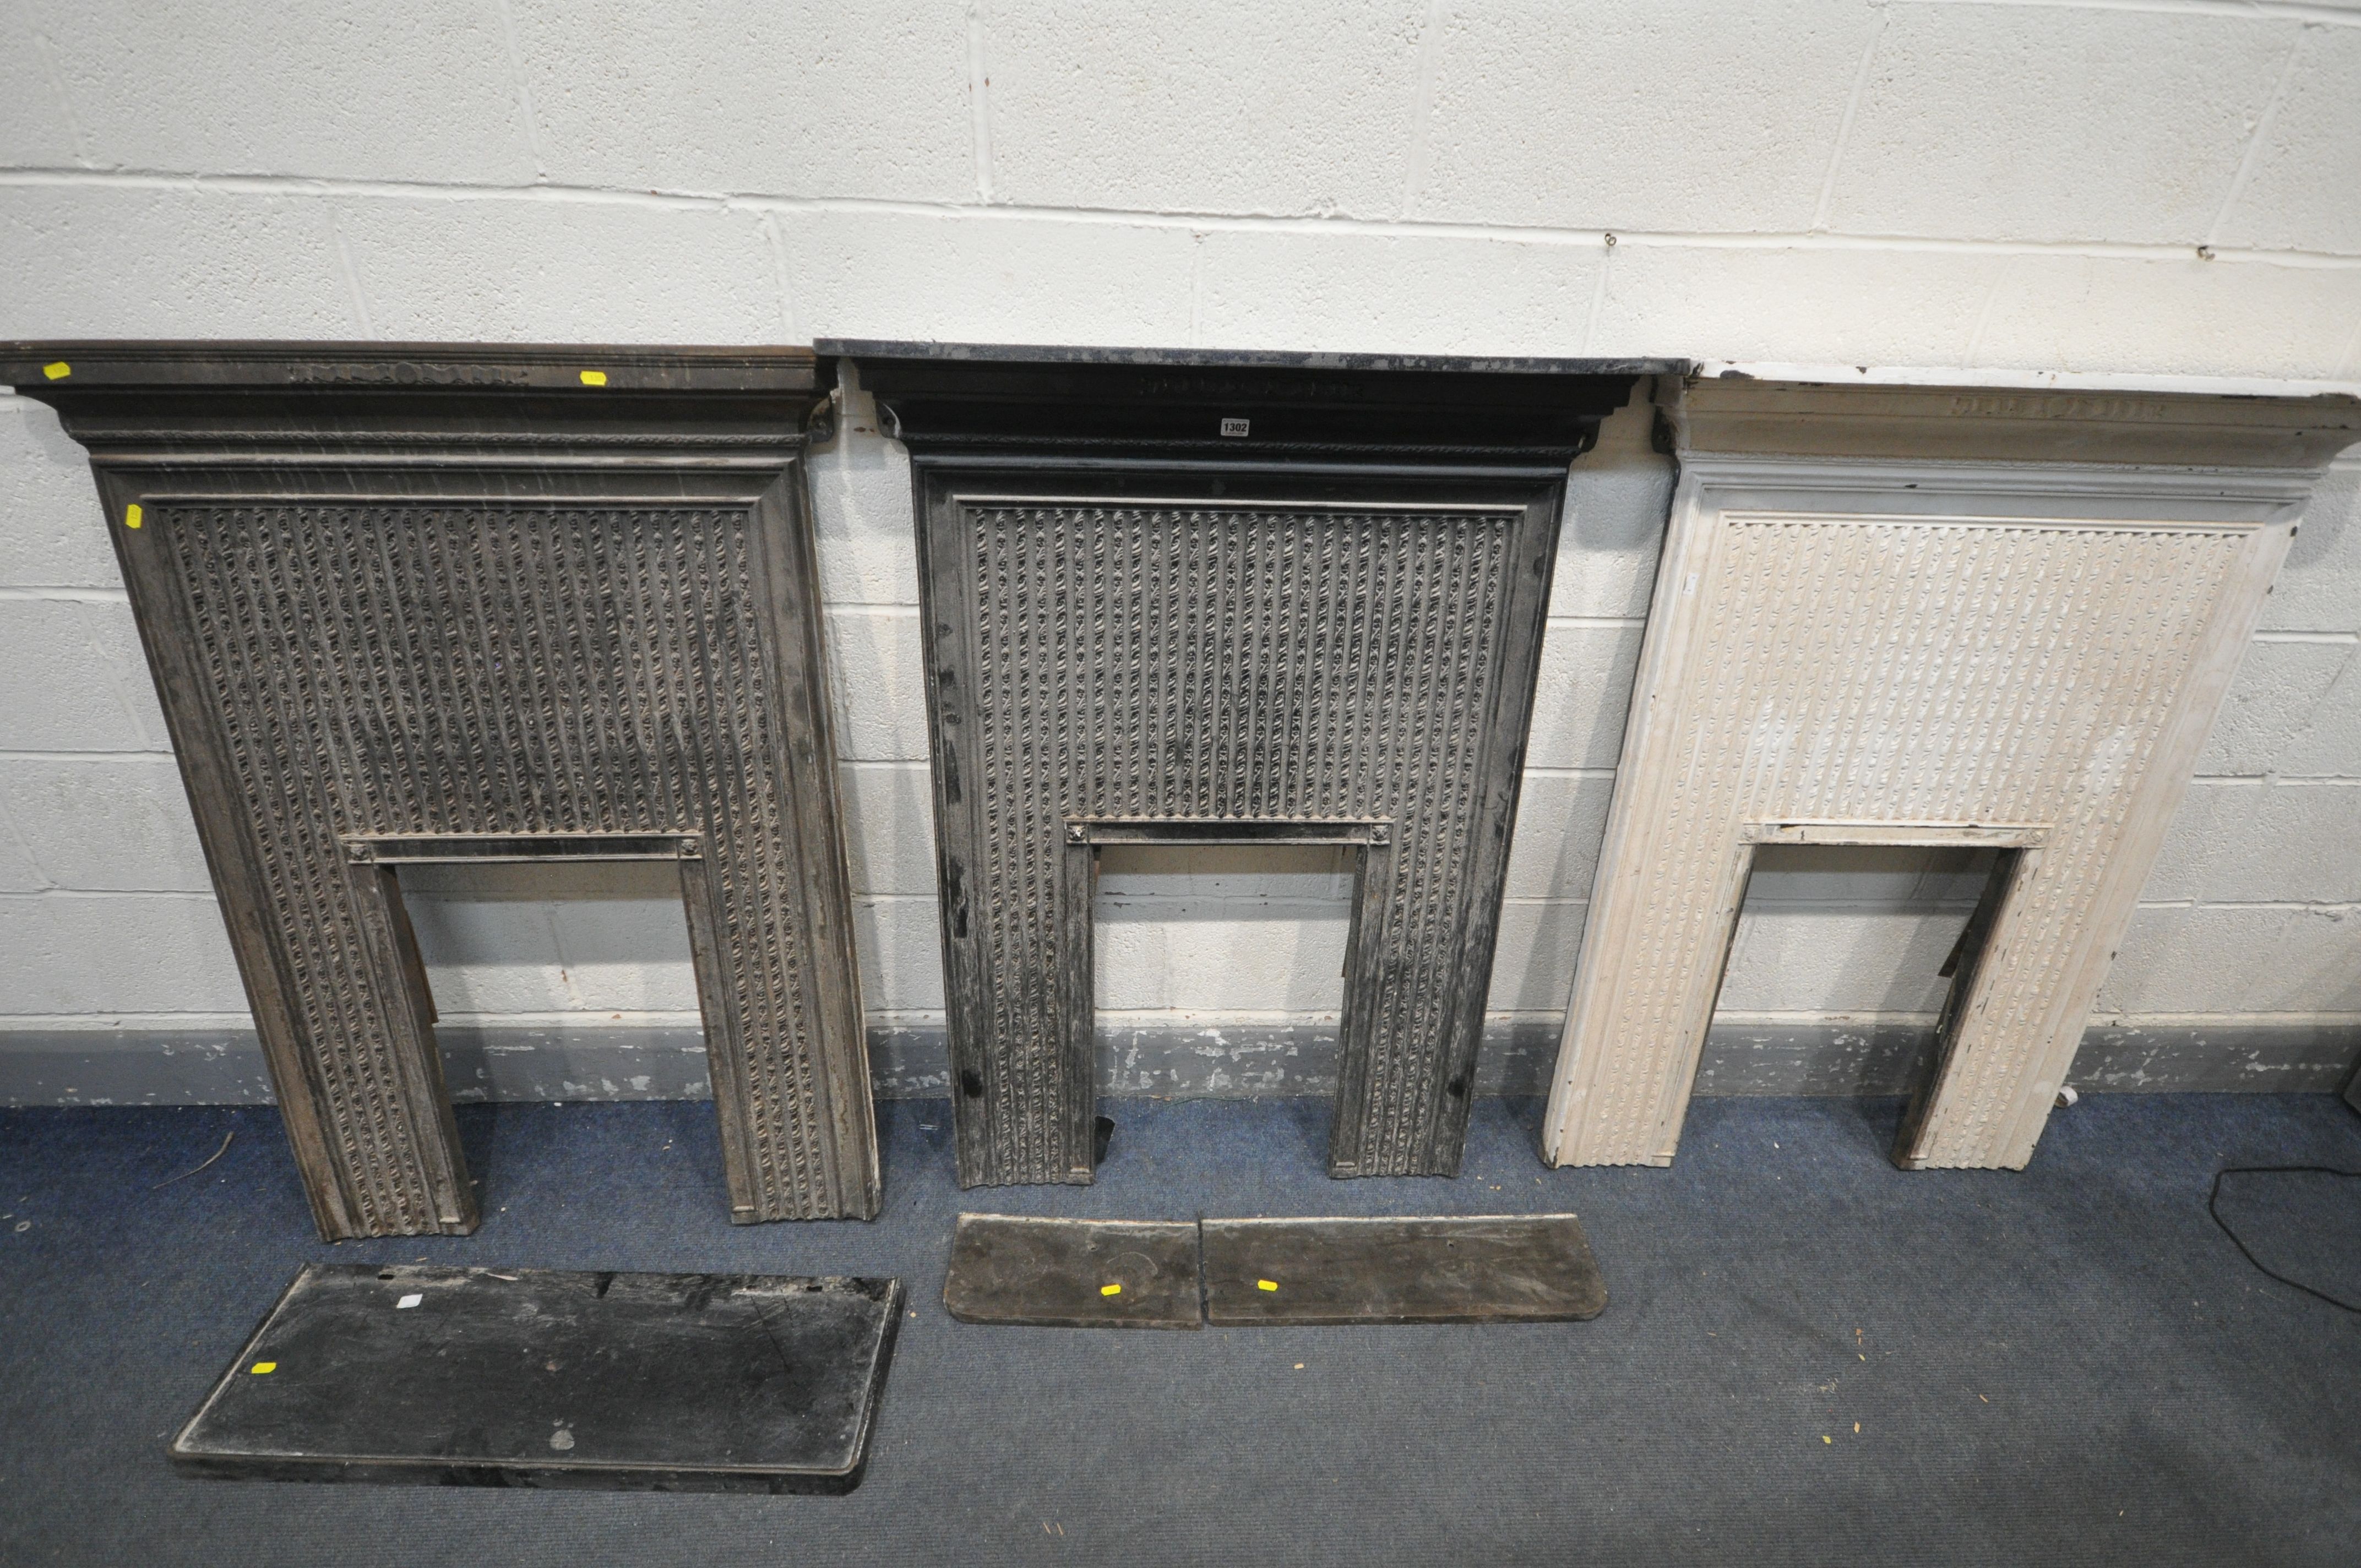 THREE CAST IRON FIRE SURROUNDS, two painted black, one painted white, width 91cm x depth 17cm x